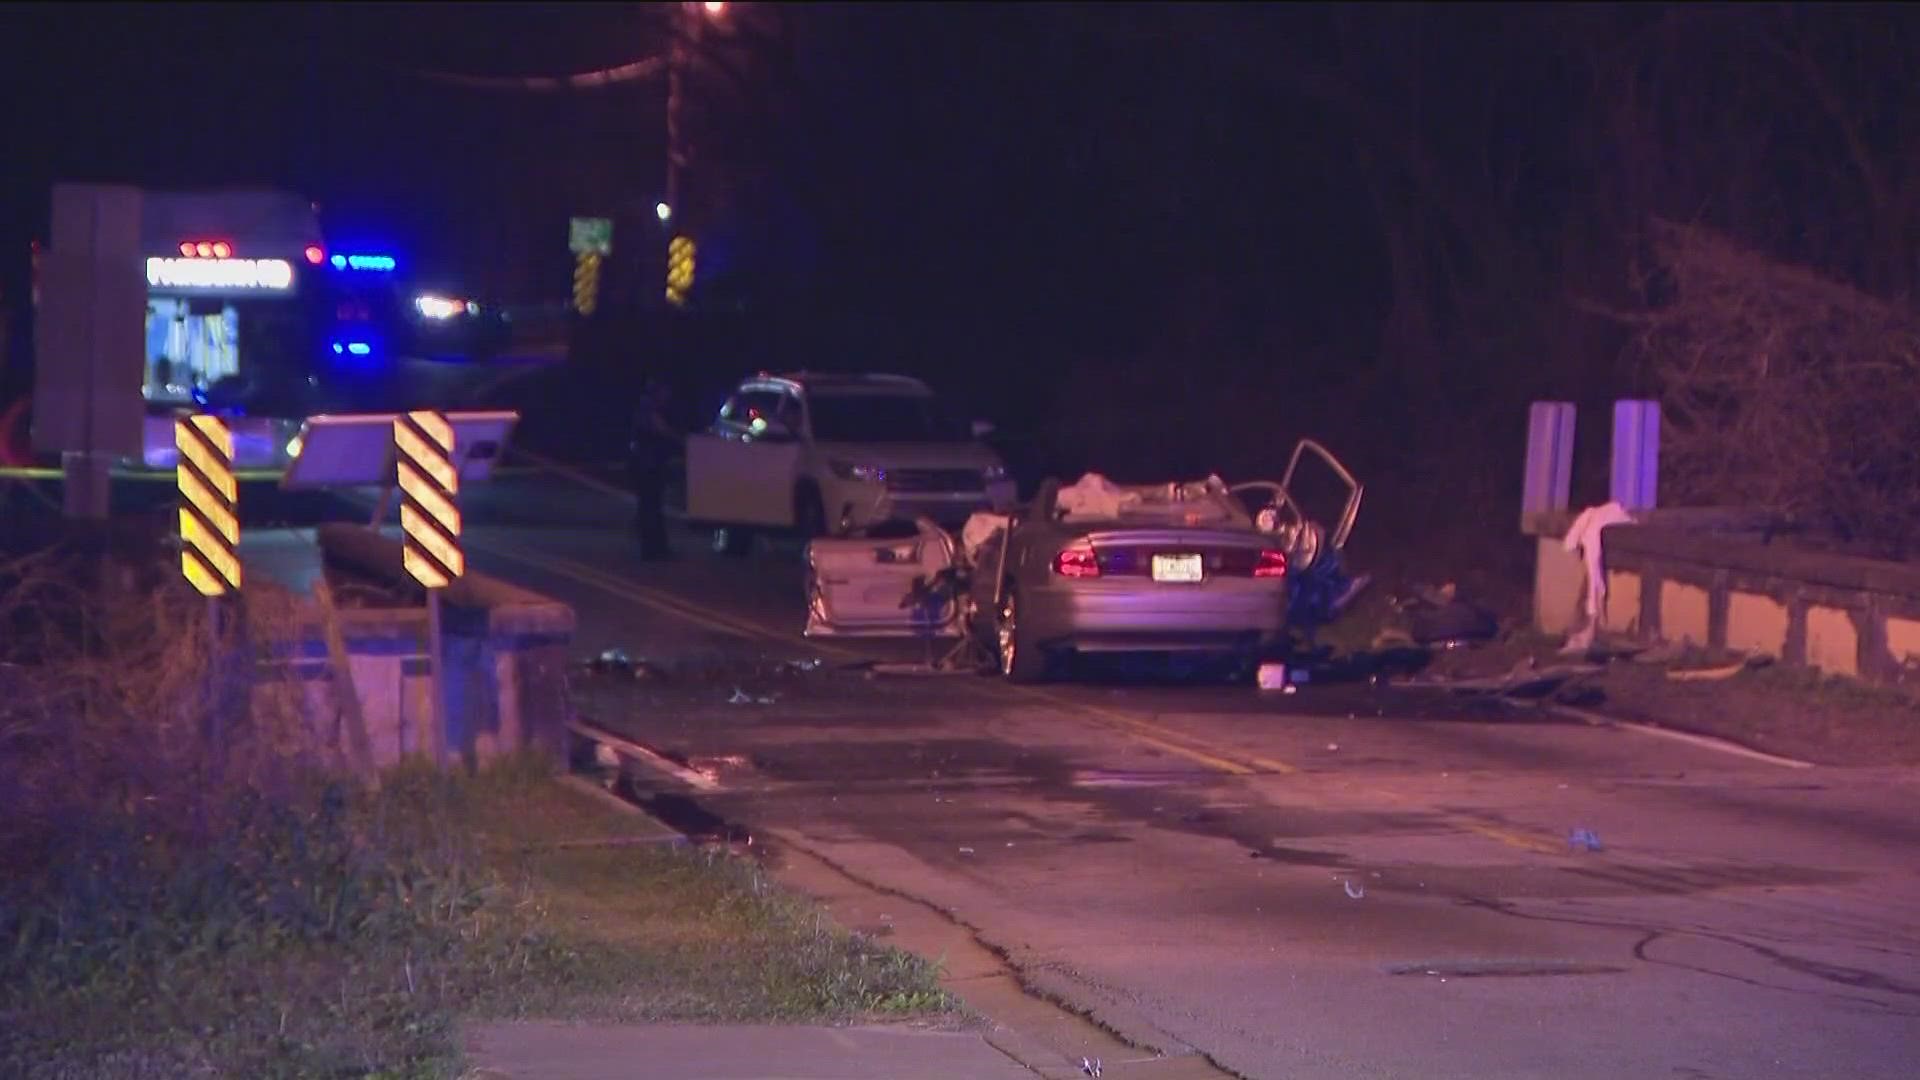 Two people were killed overnight in a crash in the City of South Fulton.